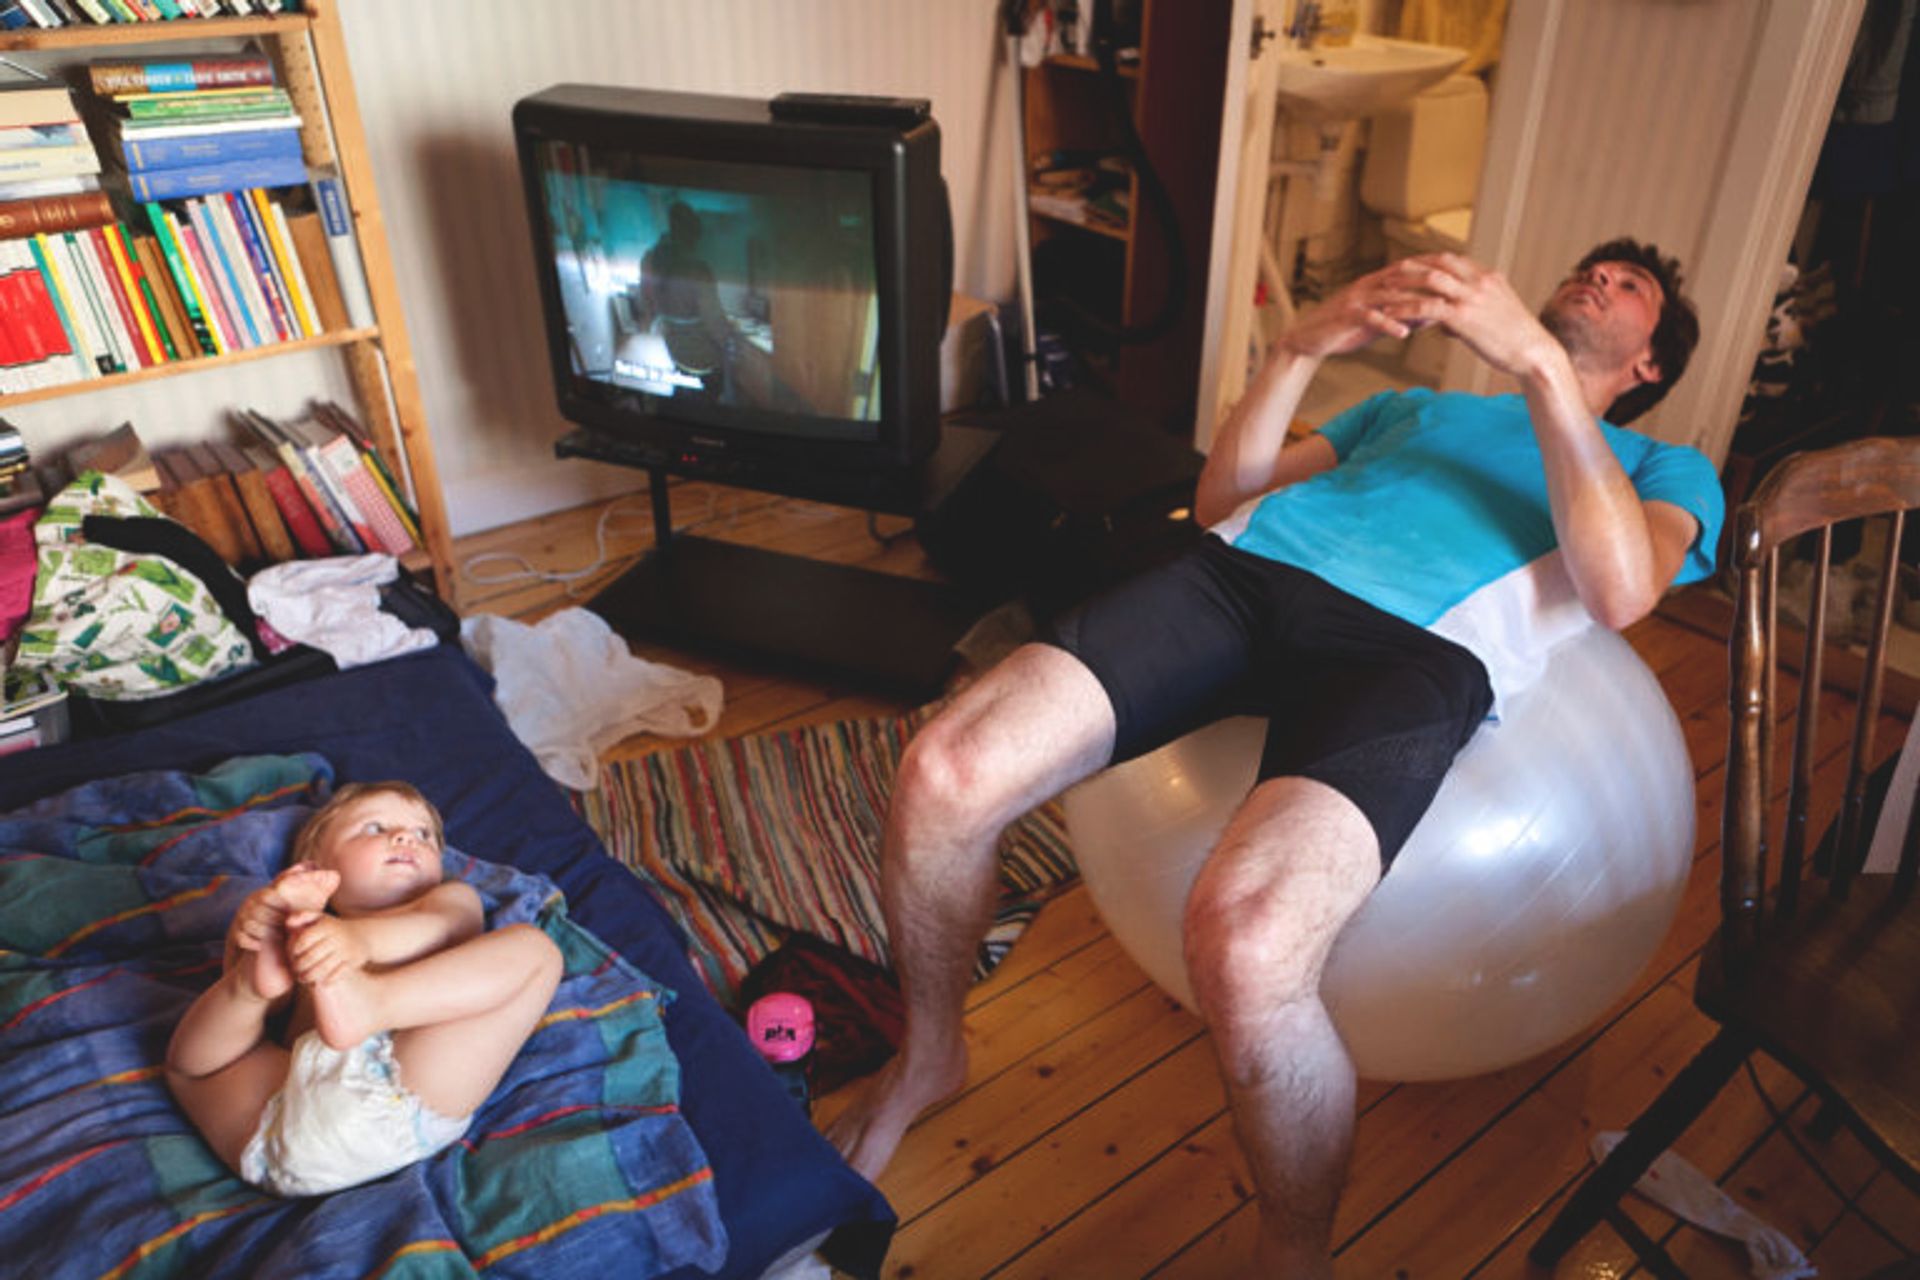 A father is working out at home with a pilates ball while the baby lies on the bed right next to him.